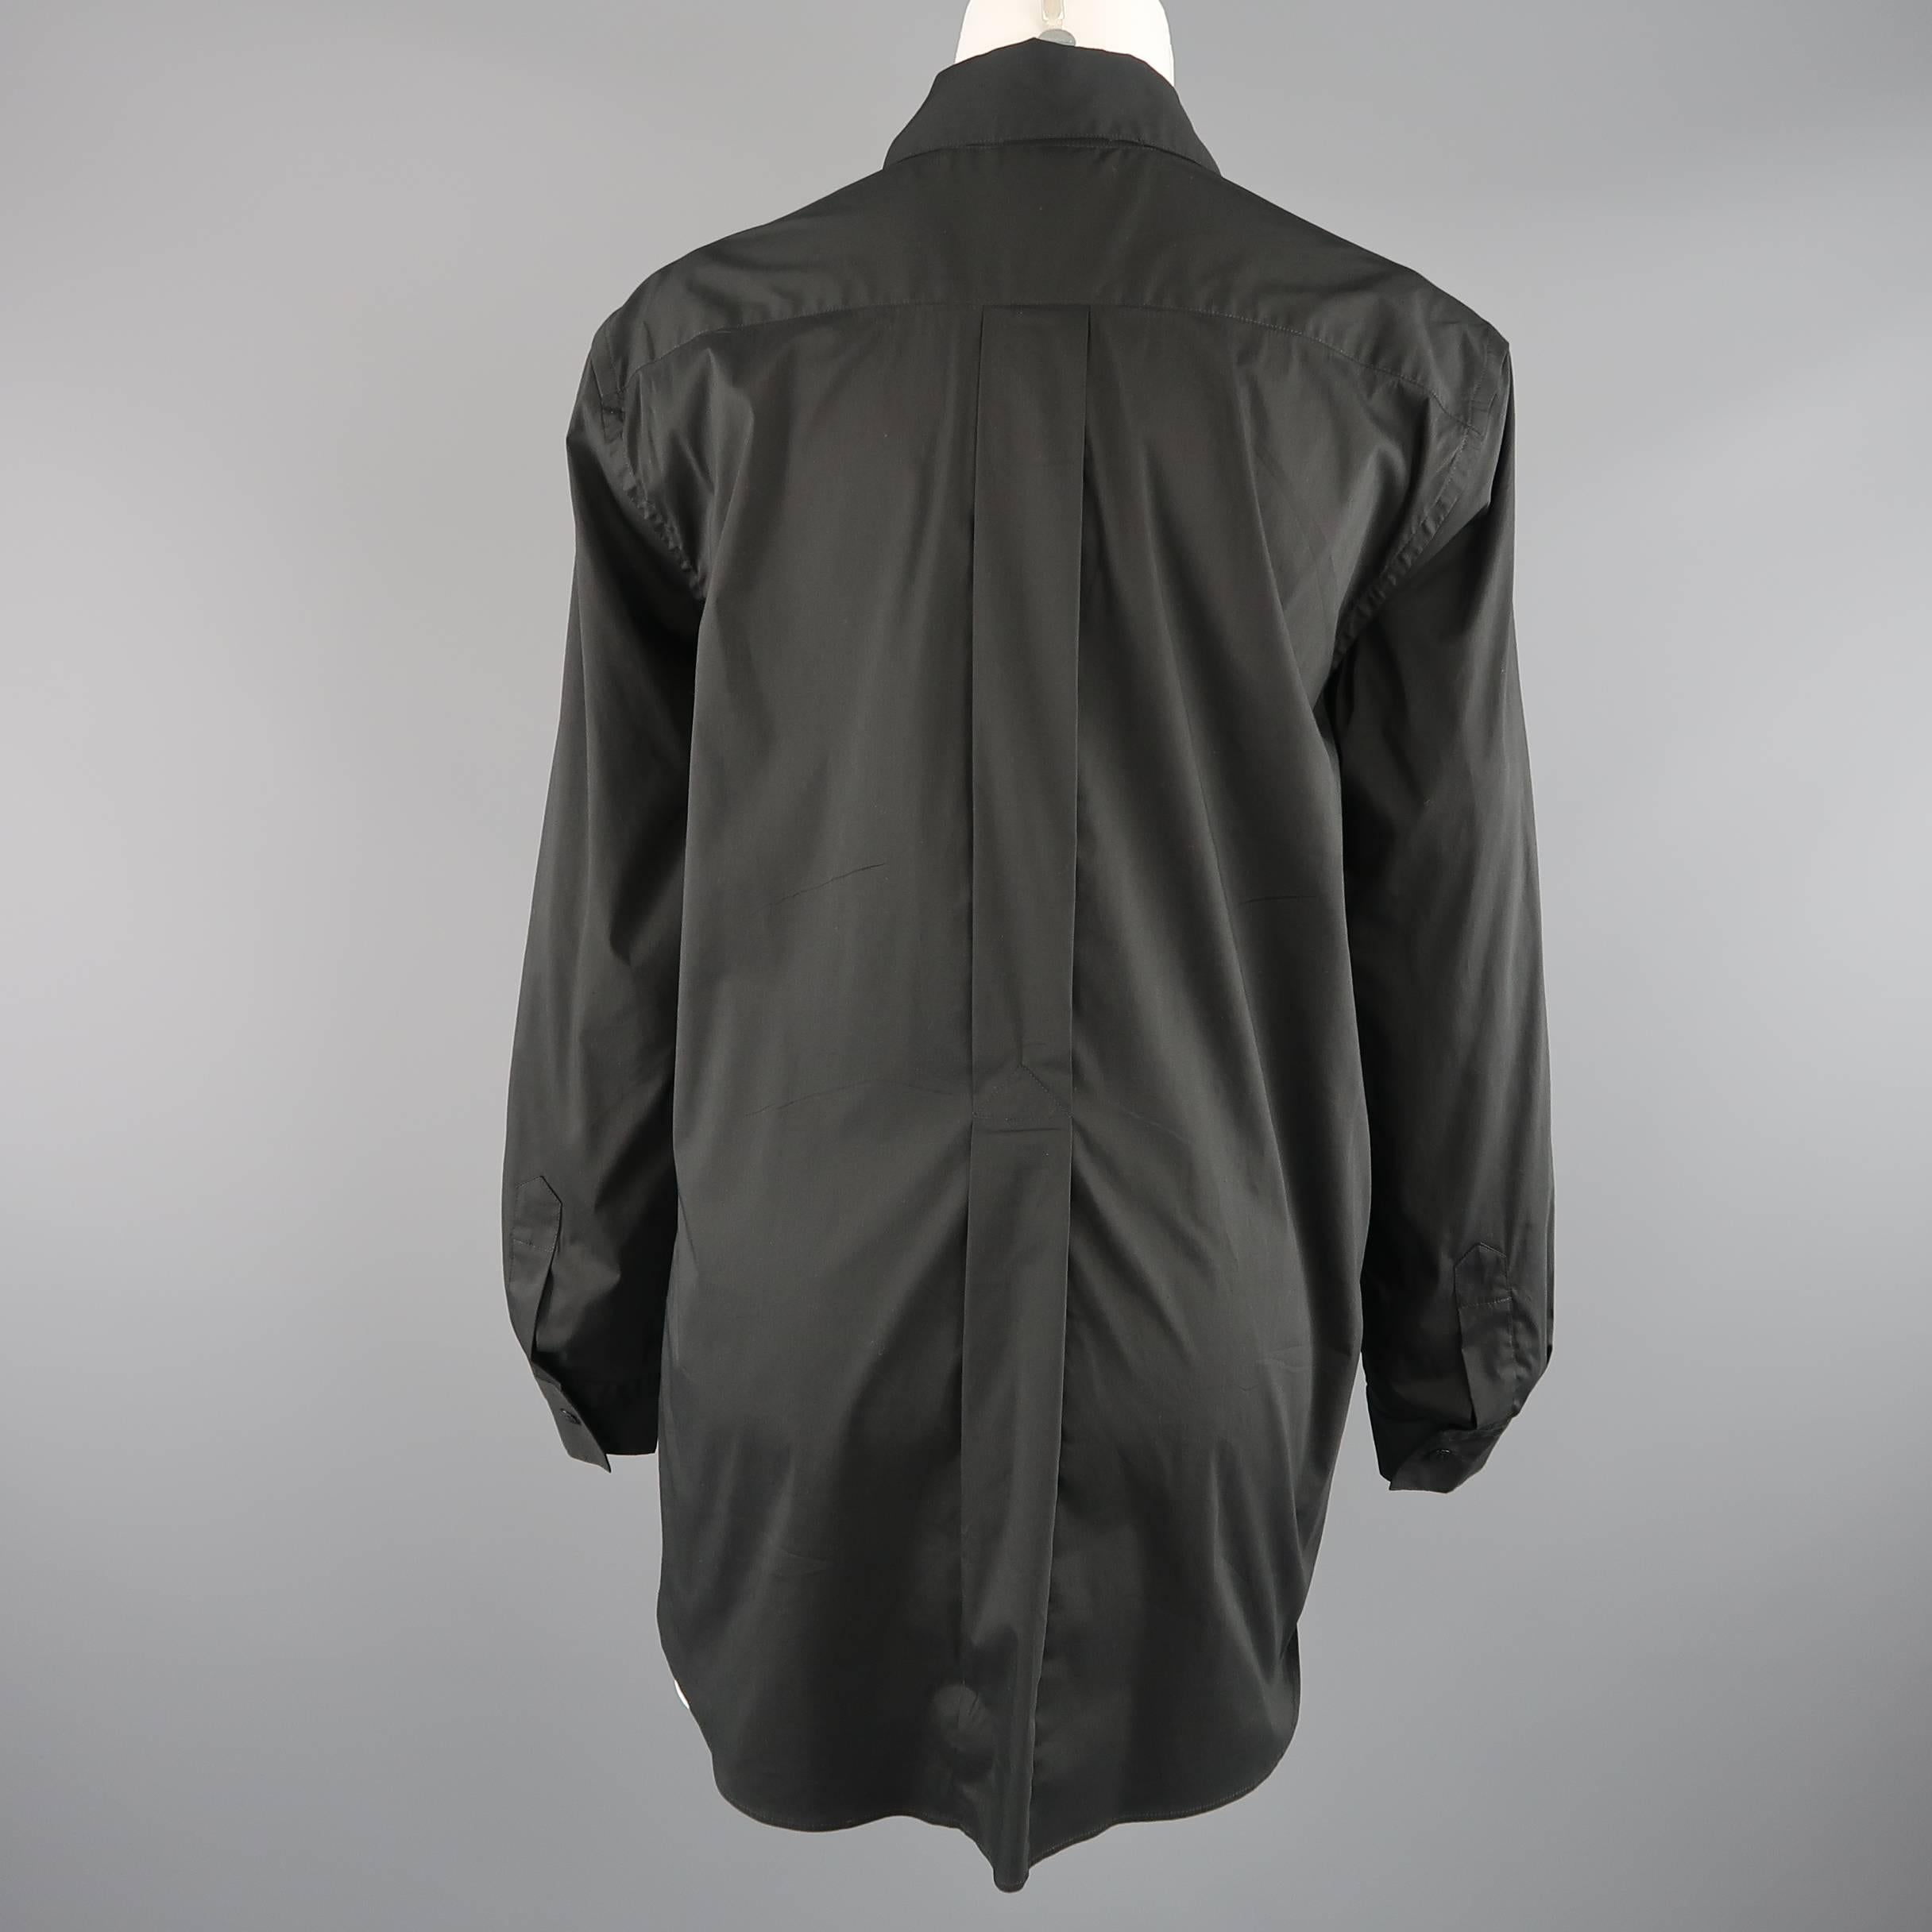 Jean Paul Gaultier Size M Black Tied Front Collared Shirt 1